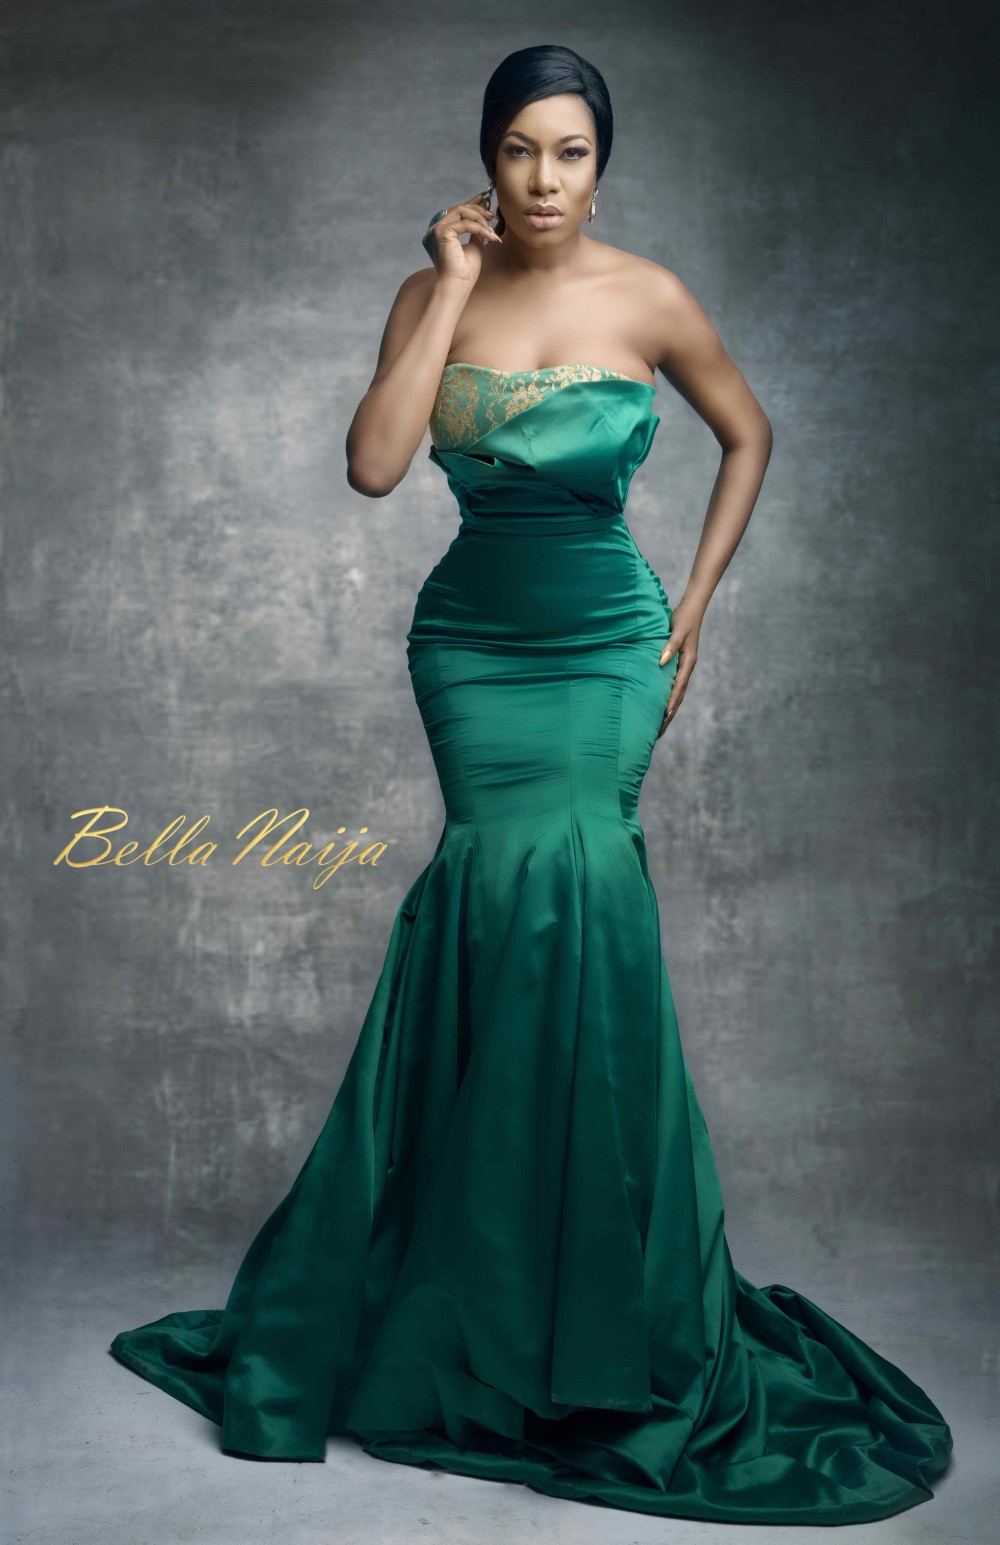 Actress Chika Ike is so Svelte & Sophisticated in these Photos | BellaNaija